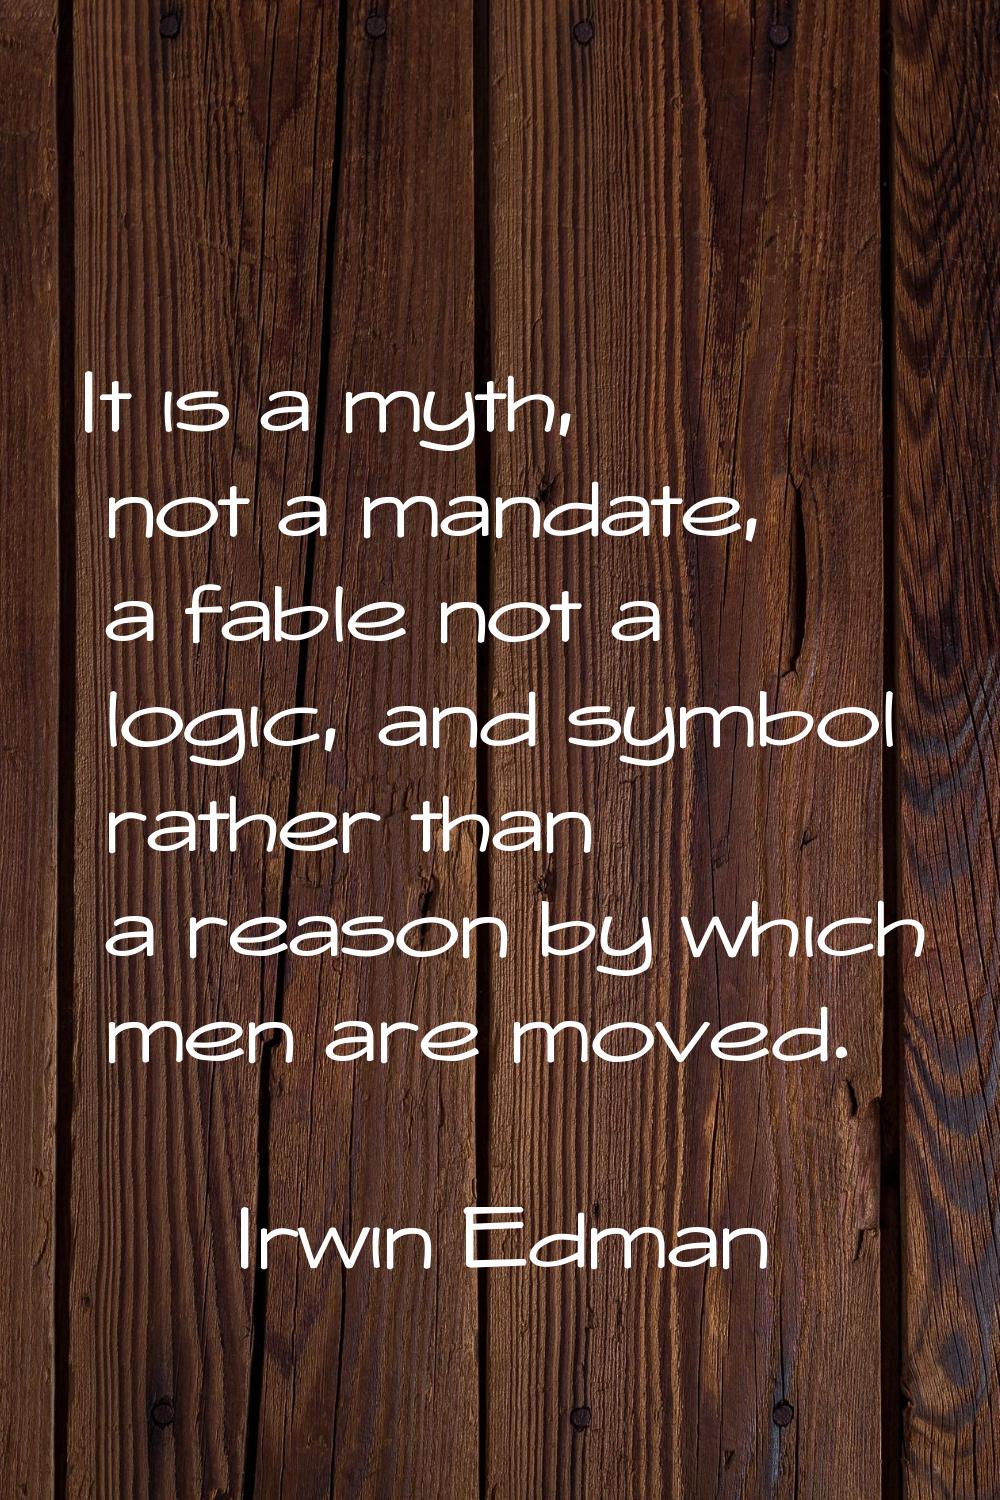 It is a myth, not a mandate, a fable not a logic, and symbol rather than a reason by which men are 